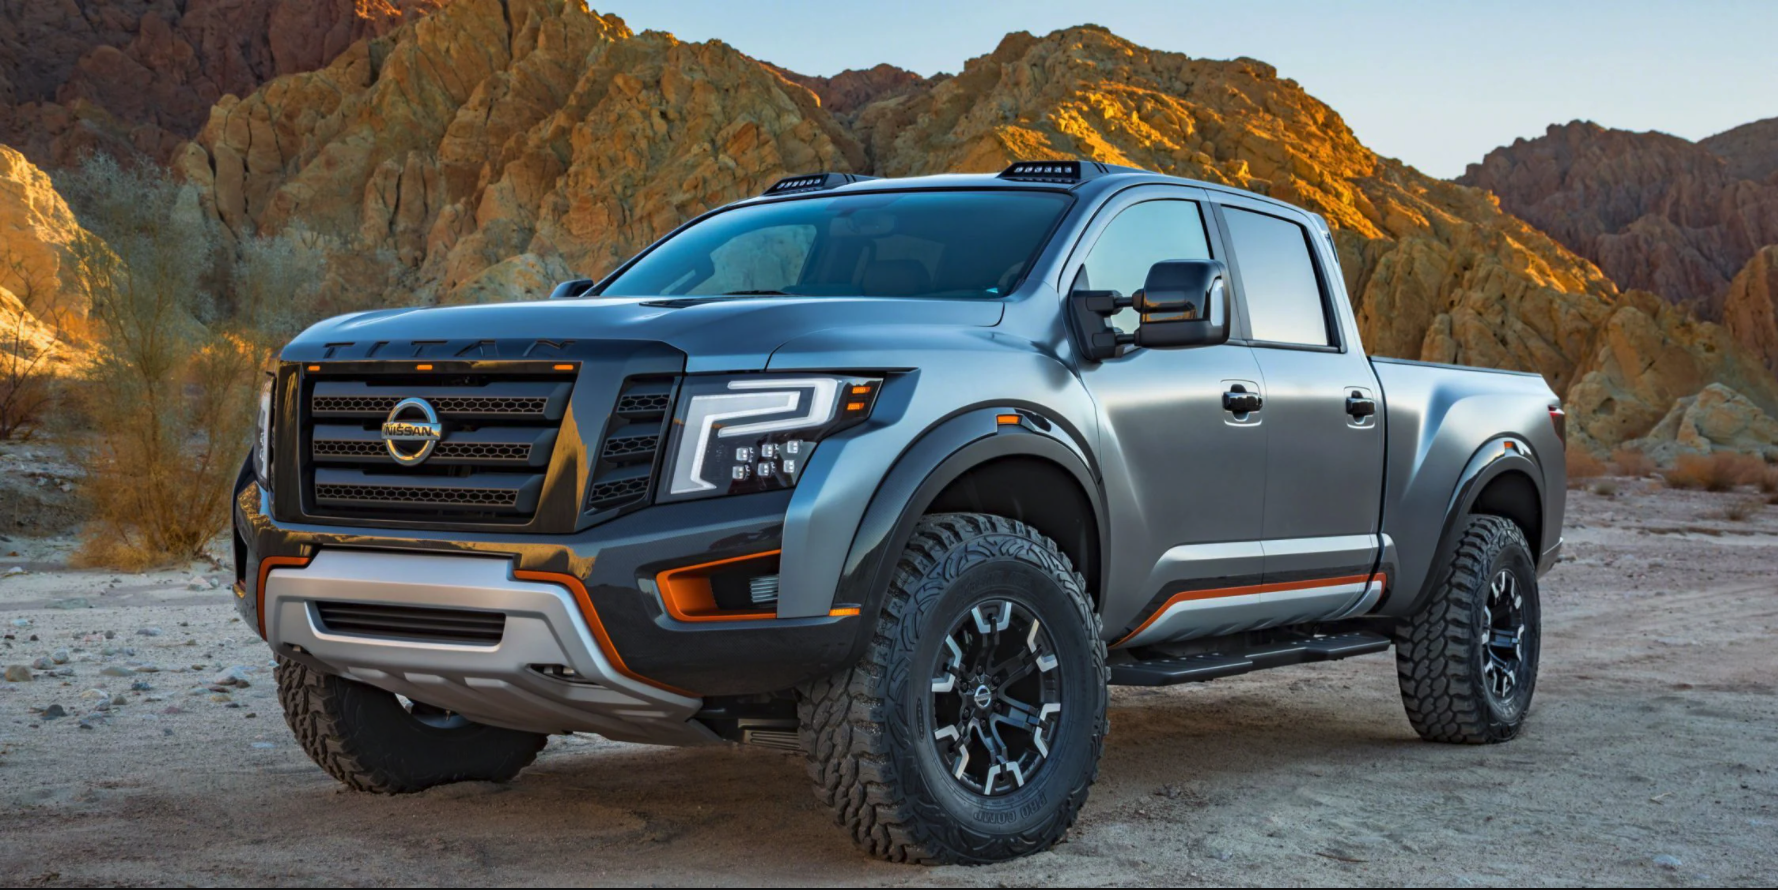 The 2021 Nissan Titan Warrior concept parked outdoors